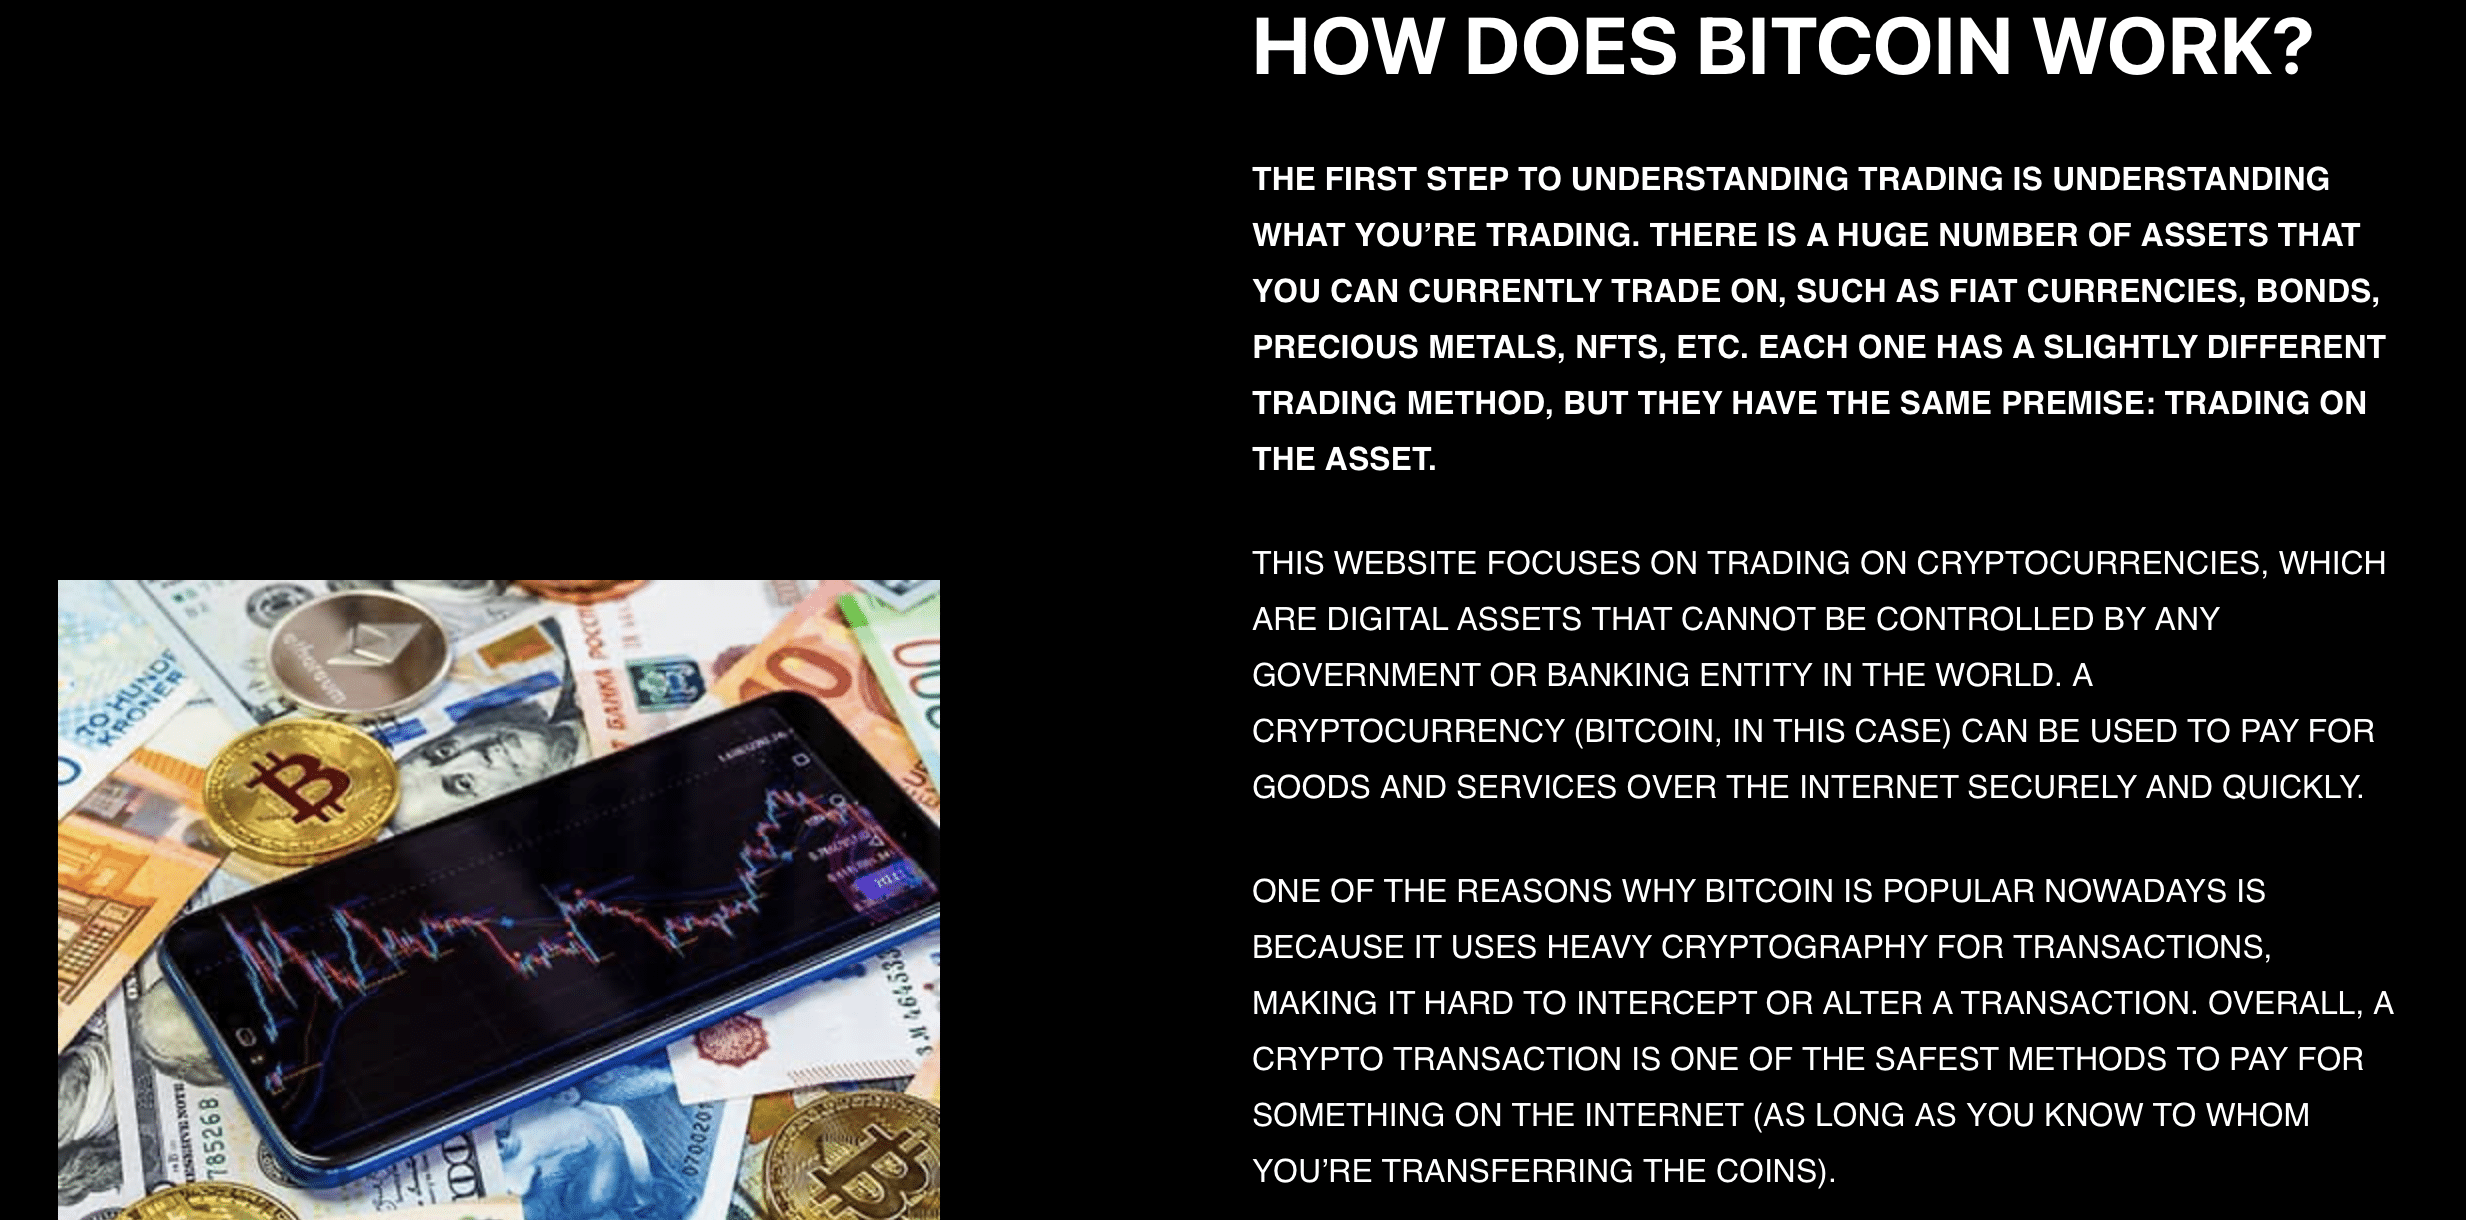 Bitcoin Lifestyle official website, How does Bitcoin work section